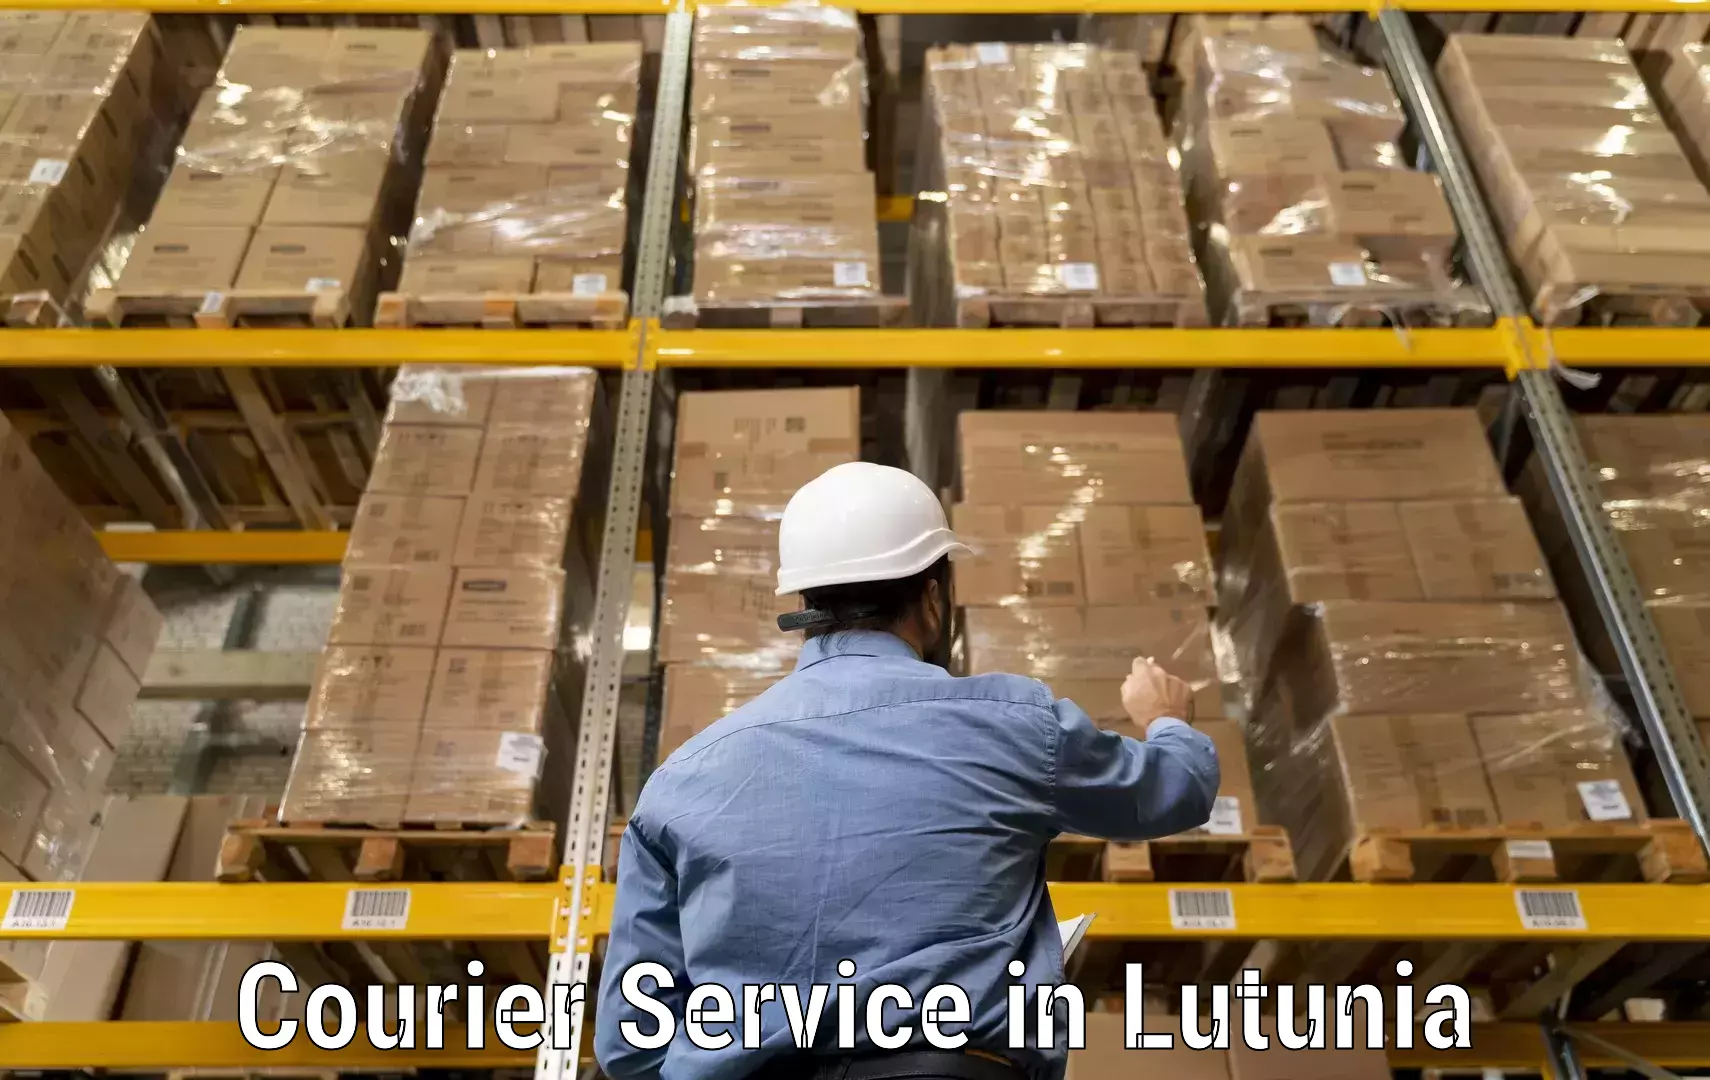 Online courier booking in Lutunia